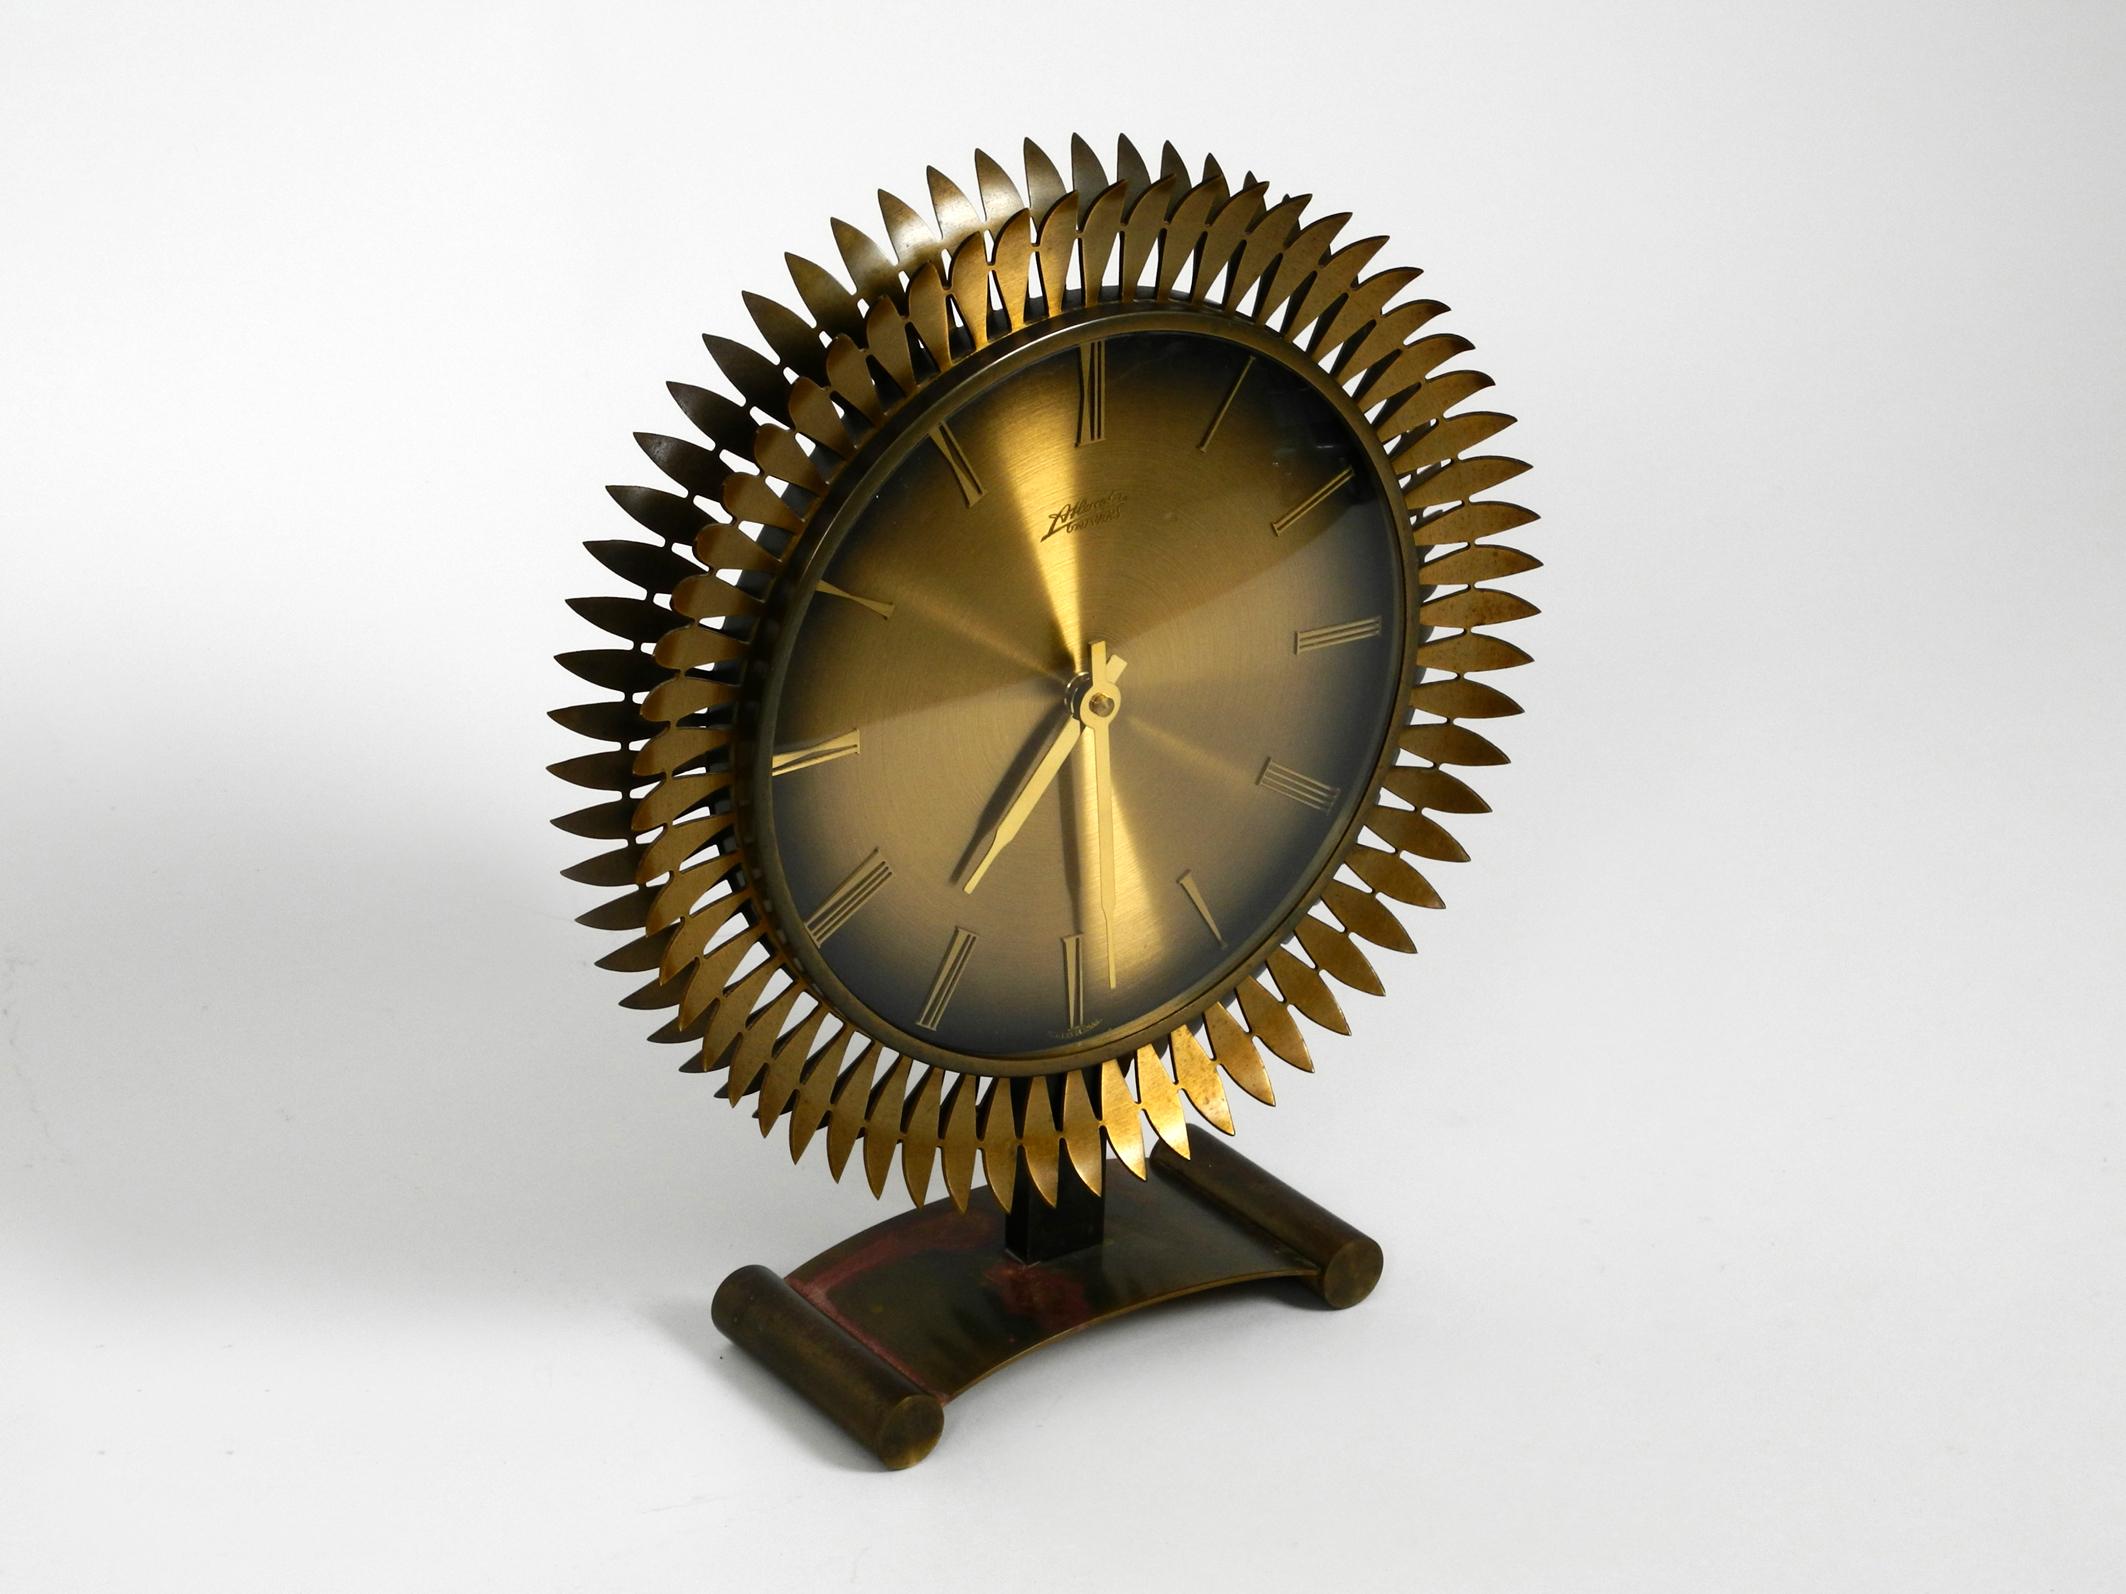 Wonderful and very rare 1960s extra-large brass Atlanta Universe sunburst table clock.
Housing and feet made of heavy brass in the Brutalist Space Age style.
Very good clean and well-kept condition with no damage to the entire clock.
Great